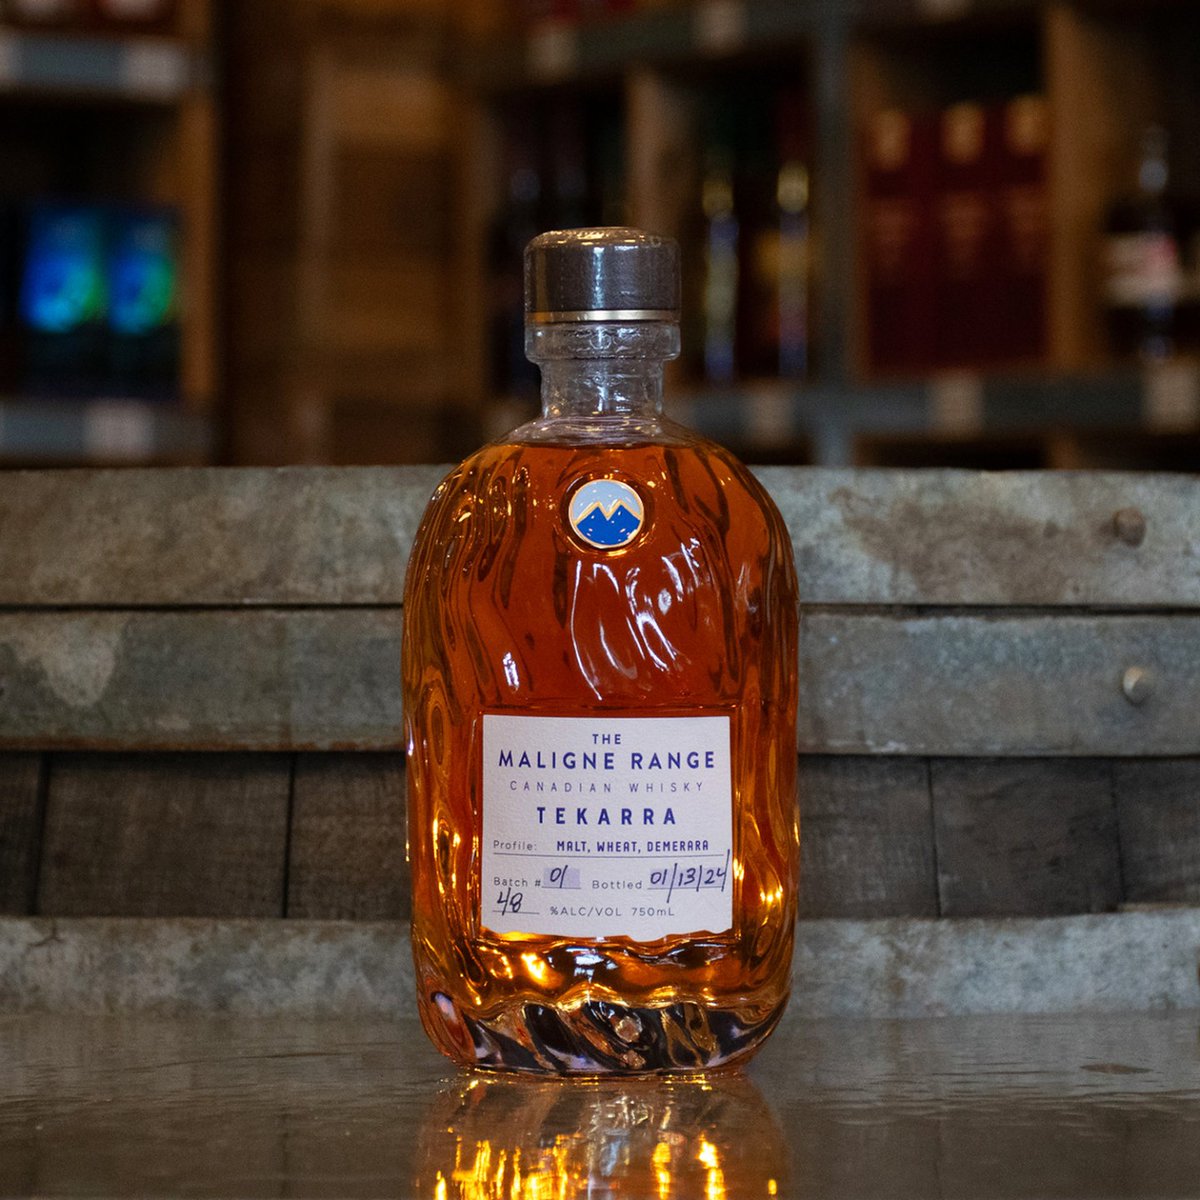 BIG NEWS CAMPIONS! Our sister distillery The Maligne Range just launched their first whisky expression 'Tekarra'! Grab a bottle at Whisky Drop. Give @themalignerange a follow for all the inside details for our opening in Jasper this summer. #CityofCampions #TheMaligneRange